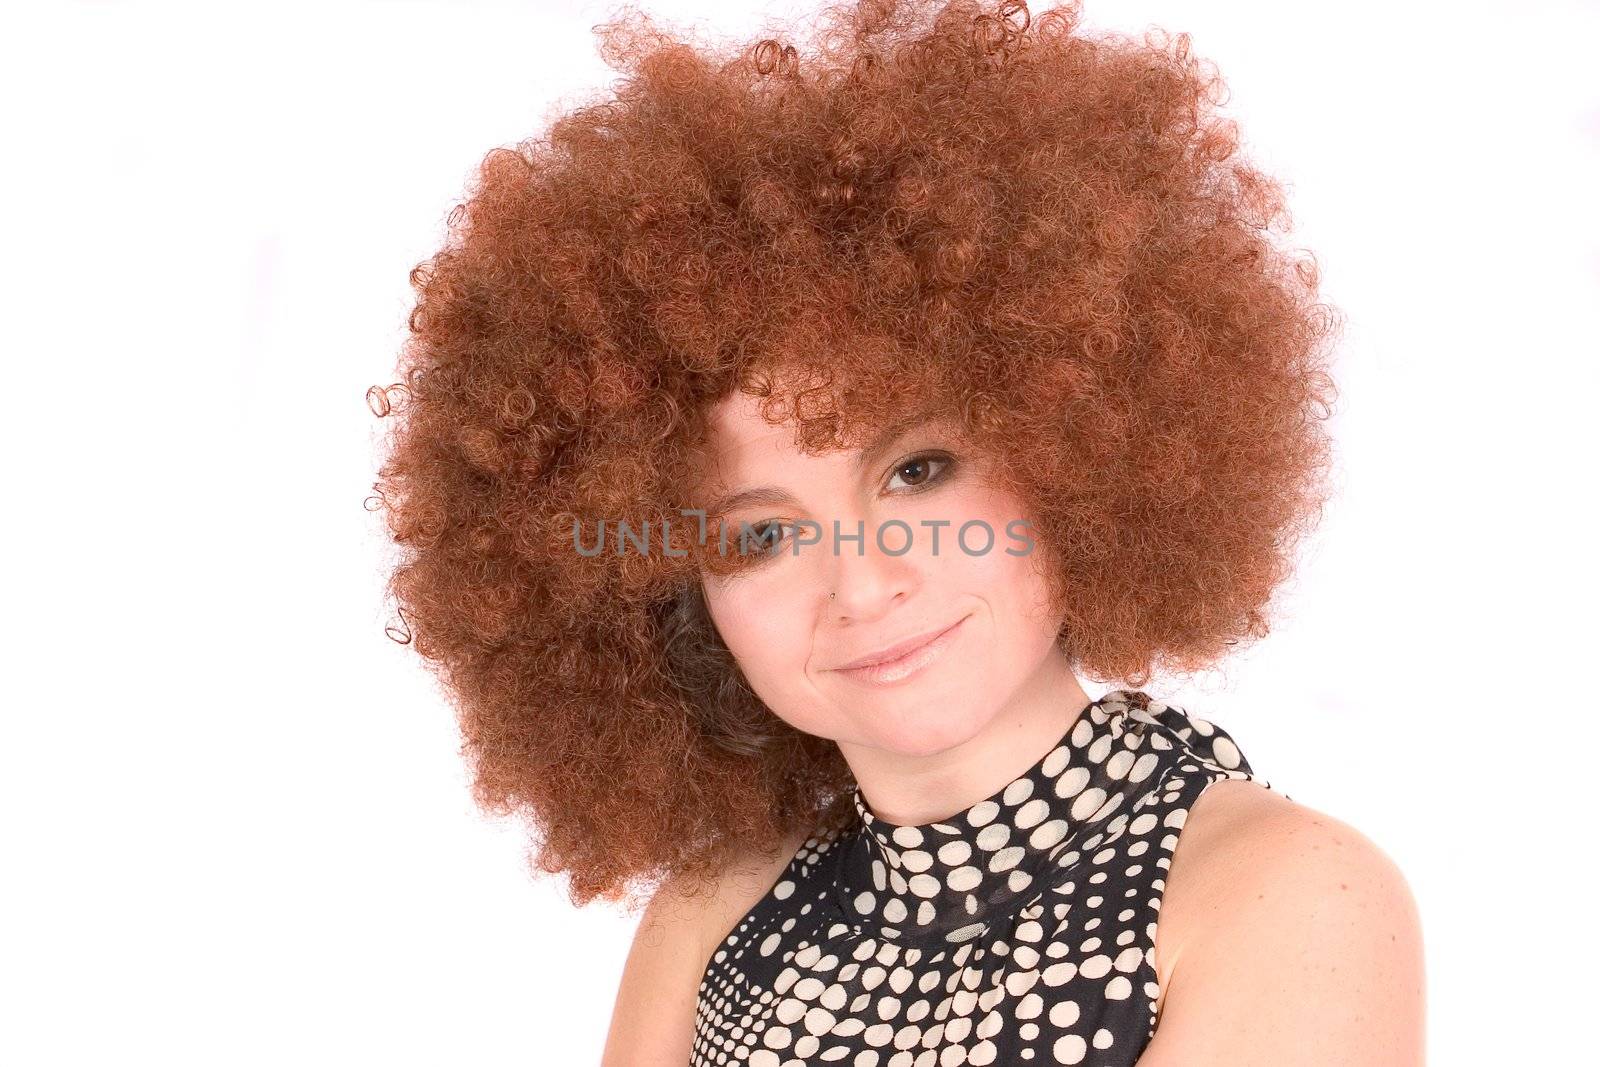 Afro wig by Fotosmurf